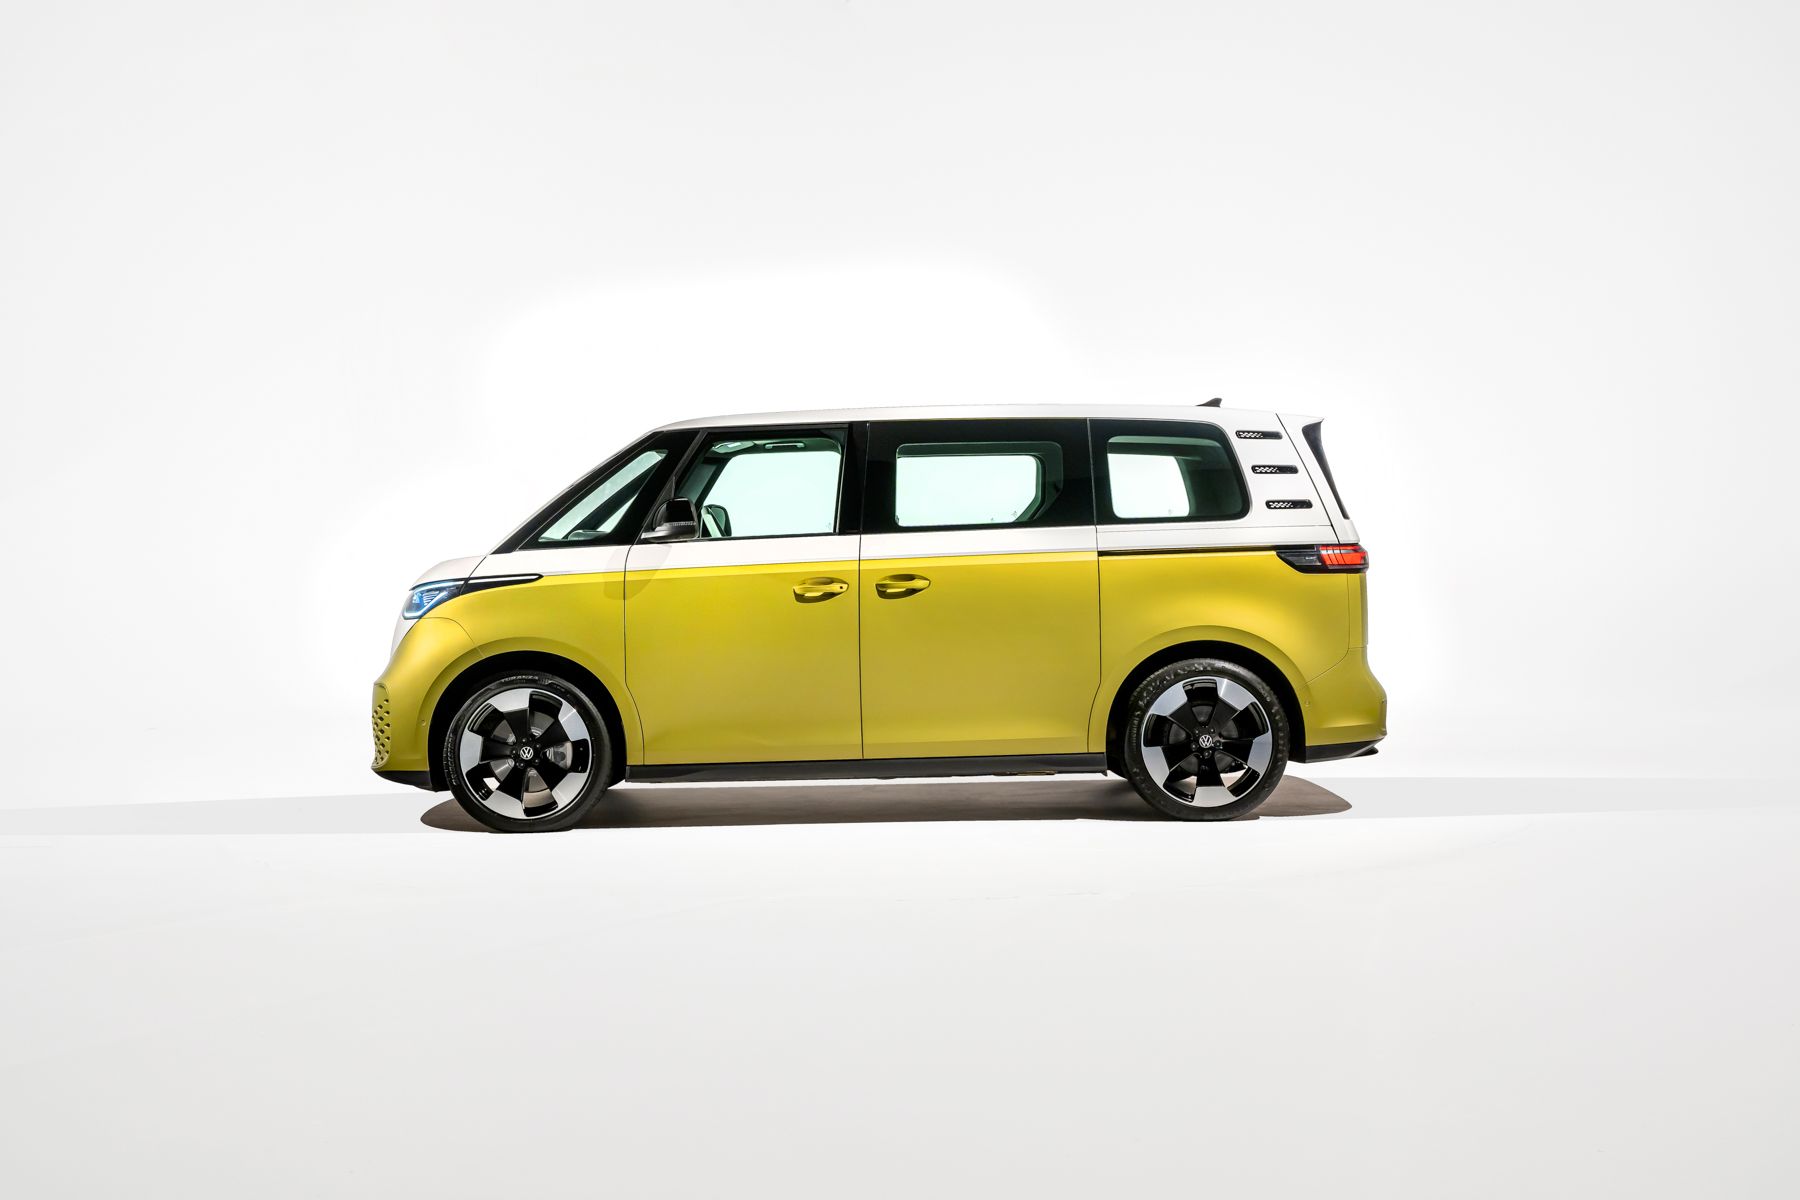 VW unveils its electric Microbus for America